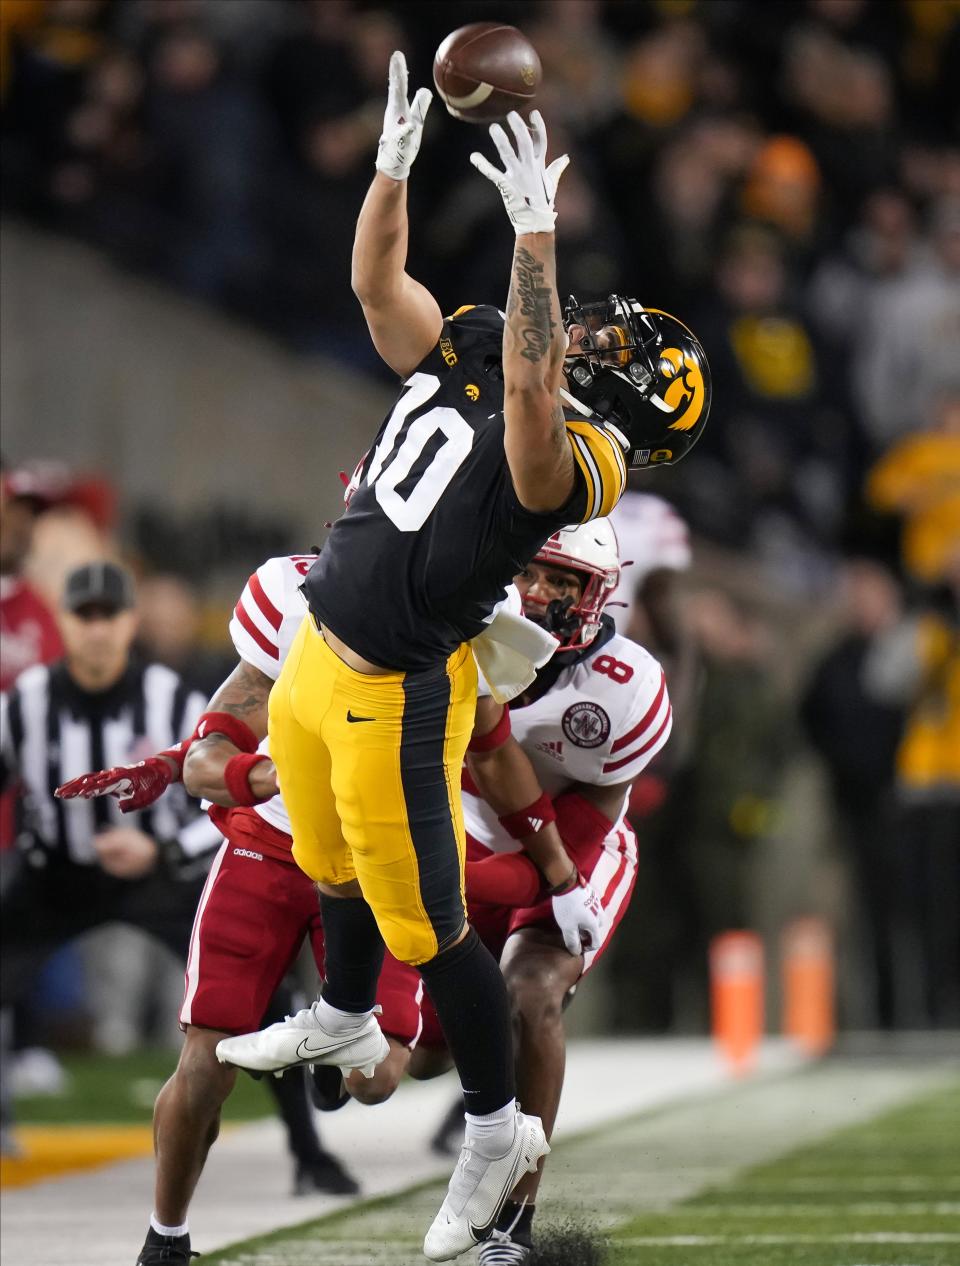 Iowa wide receiver Arland Bruce IV reaches for the ball in the fourth quarter against Nebraska on Nov. 25.